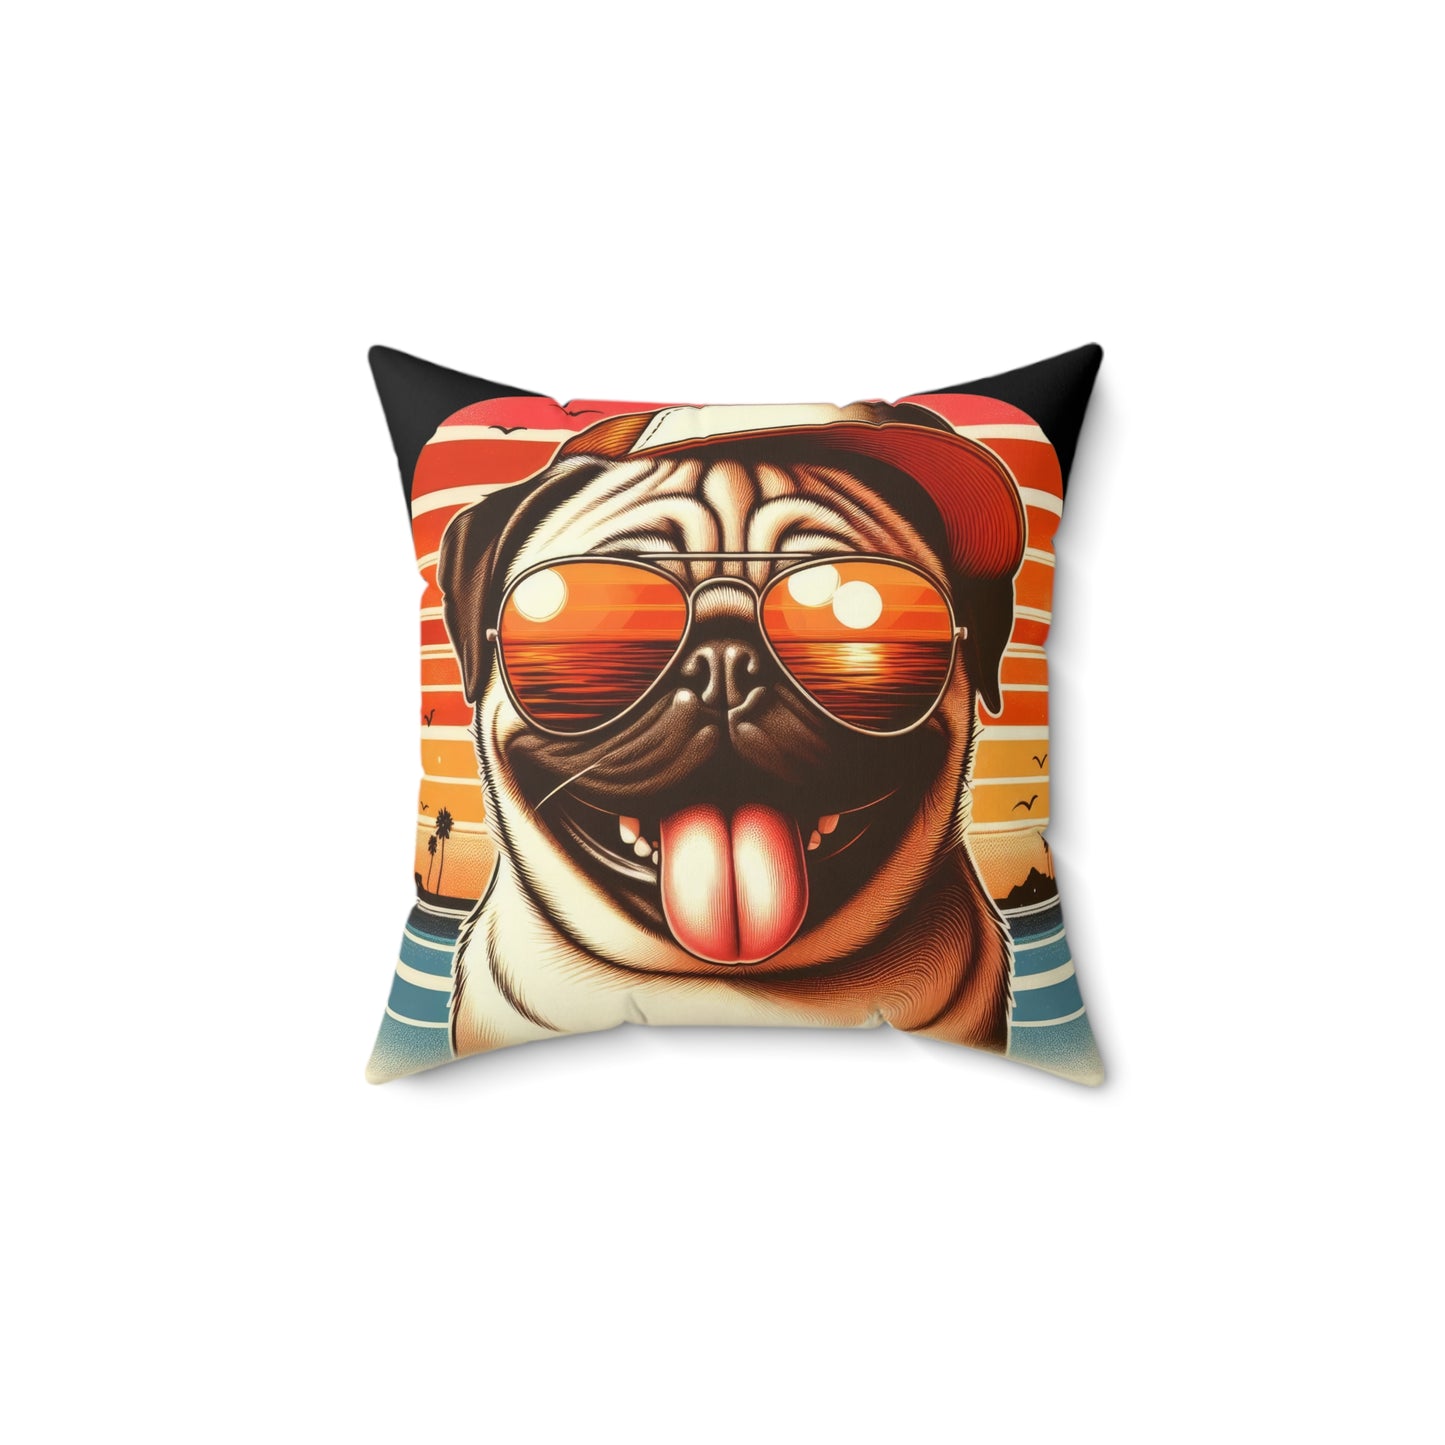 Pug Pet Polyester Square Throw Pillow